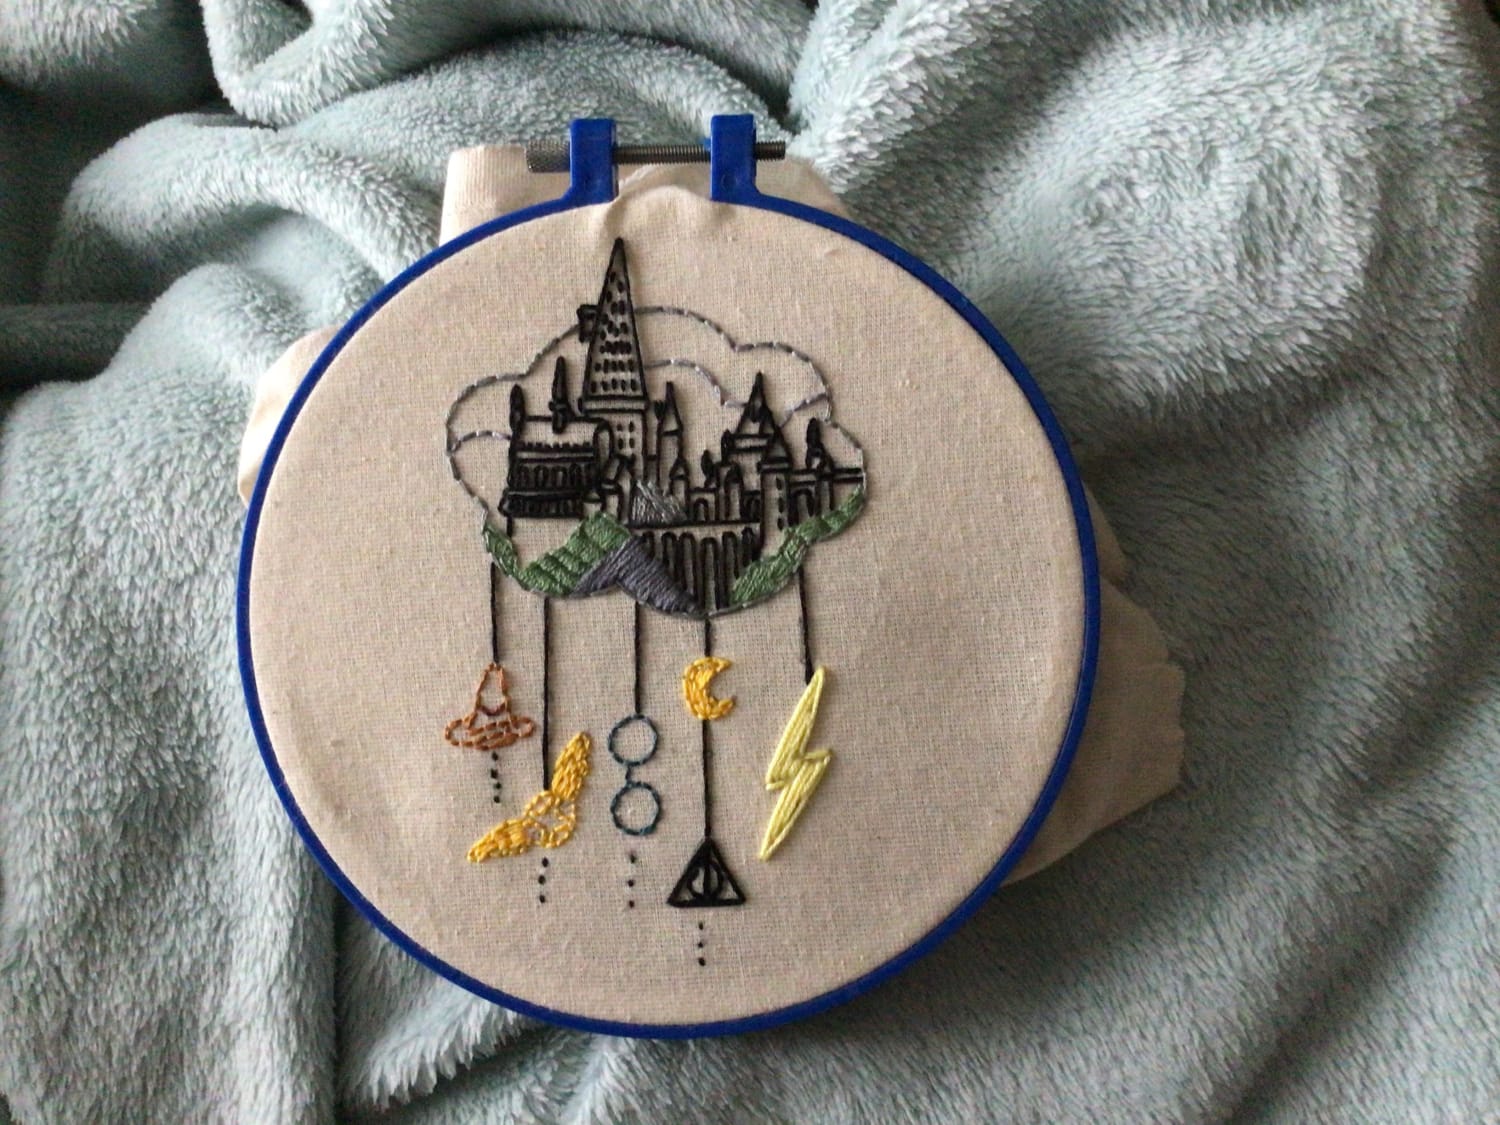 Here’s my latest piece. Harry Potter themed!